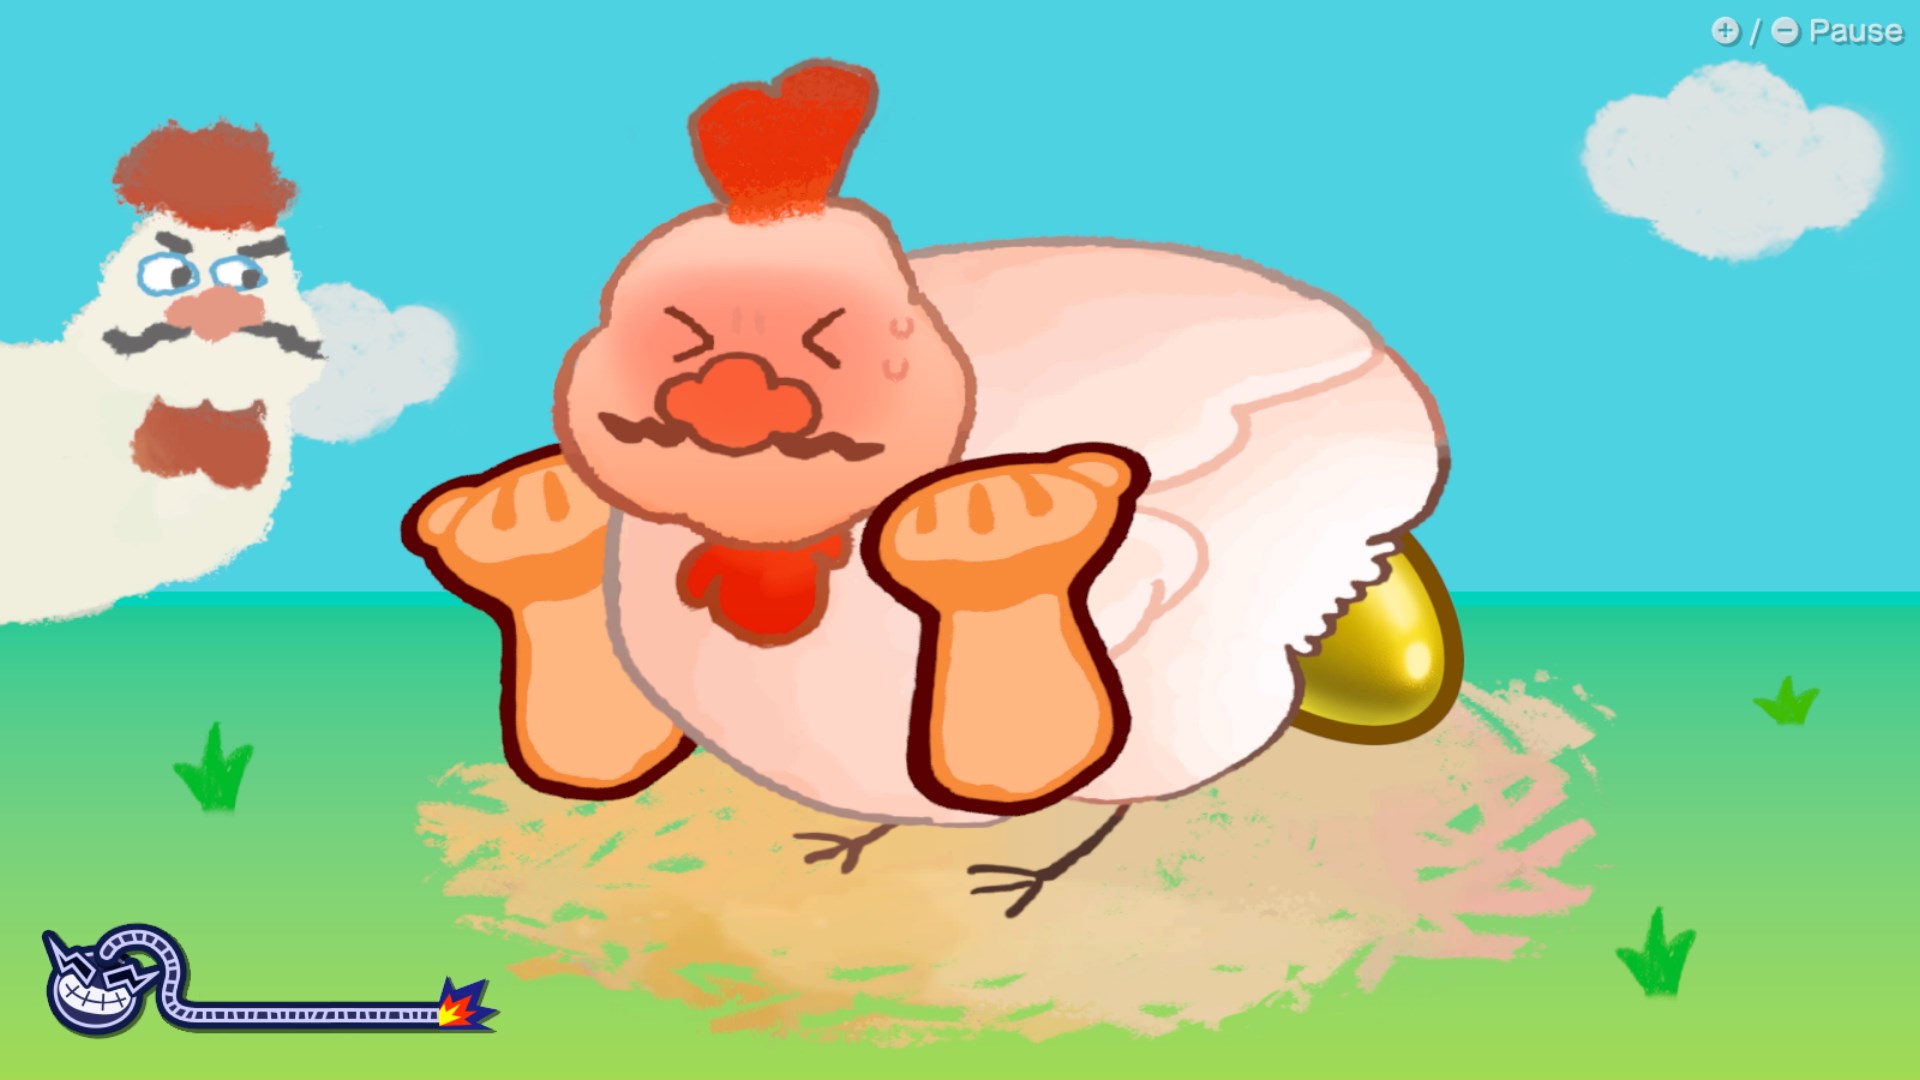 A Wario-faced chicken struggle to lay a golden egg in a screenshot from a WarioWare: Move It! microgame.